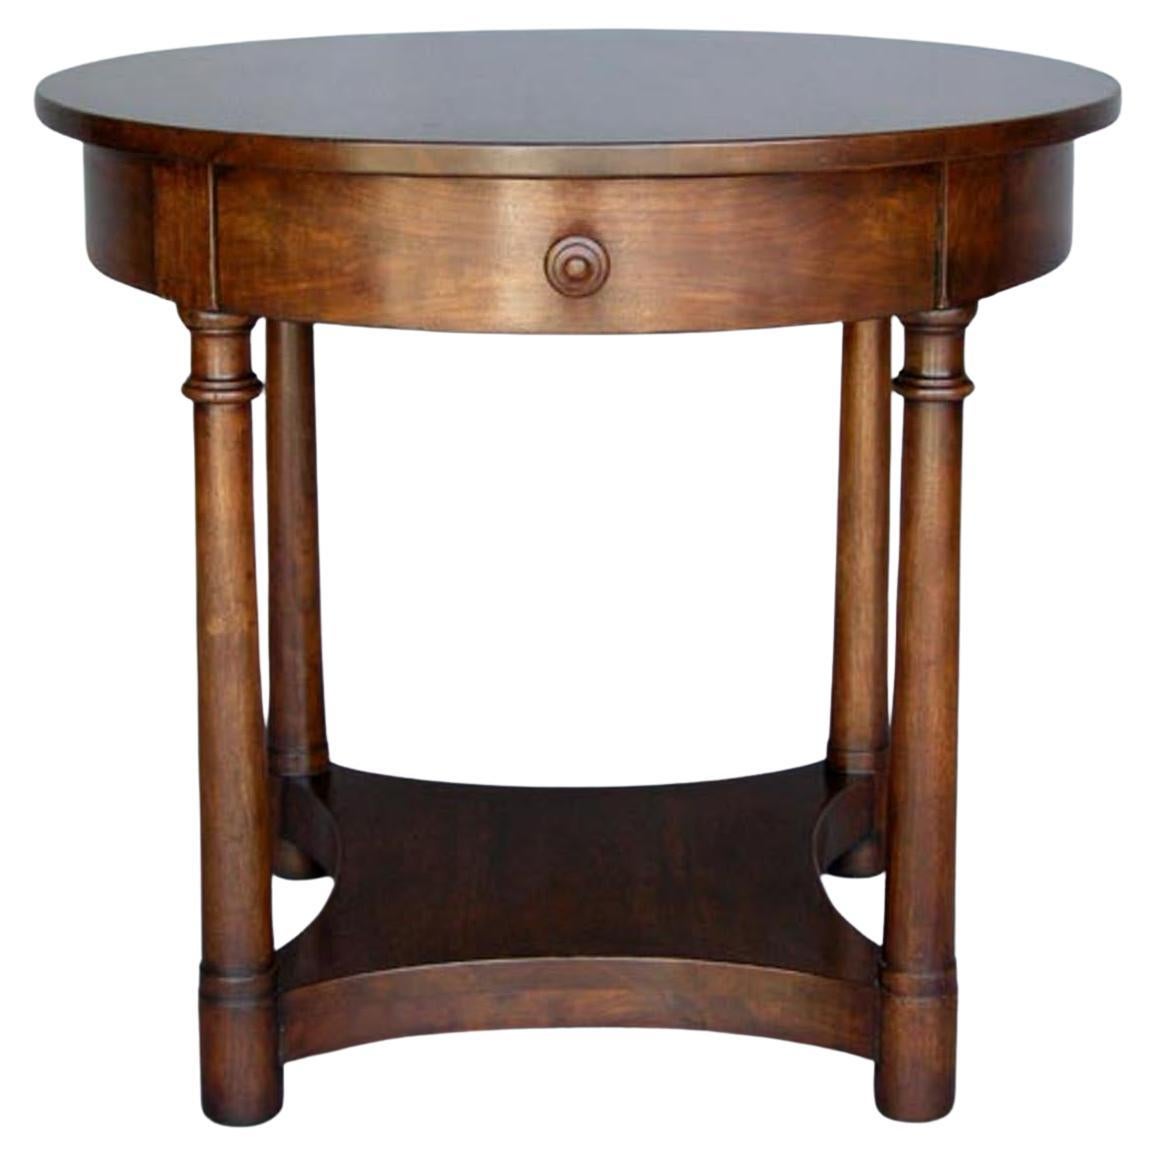 Dos Gallos Studio Custom Round Edna Table with Drawer and Shelf For Sale